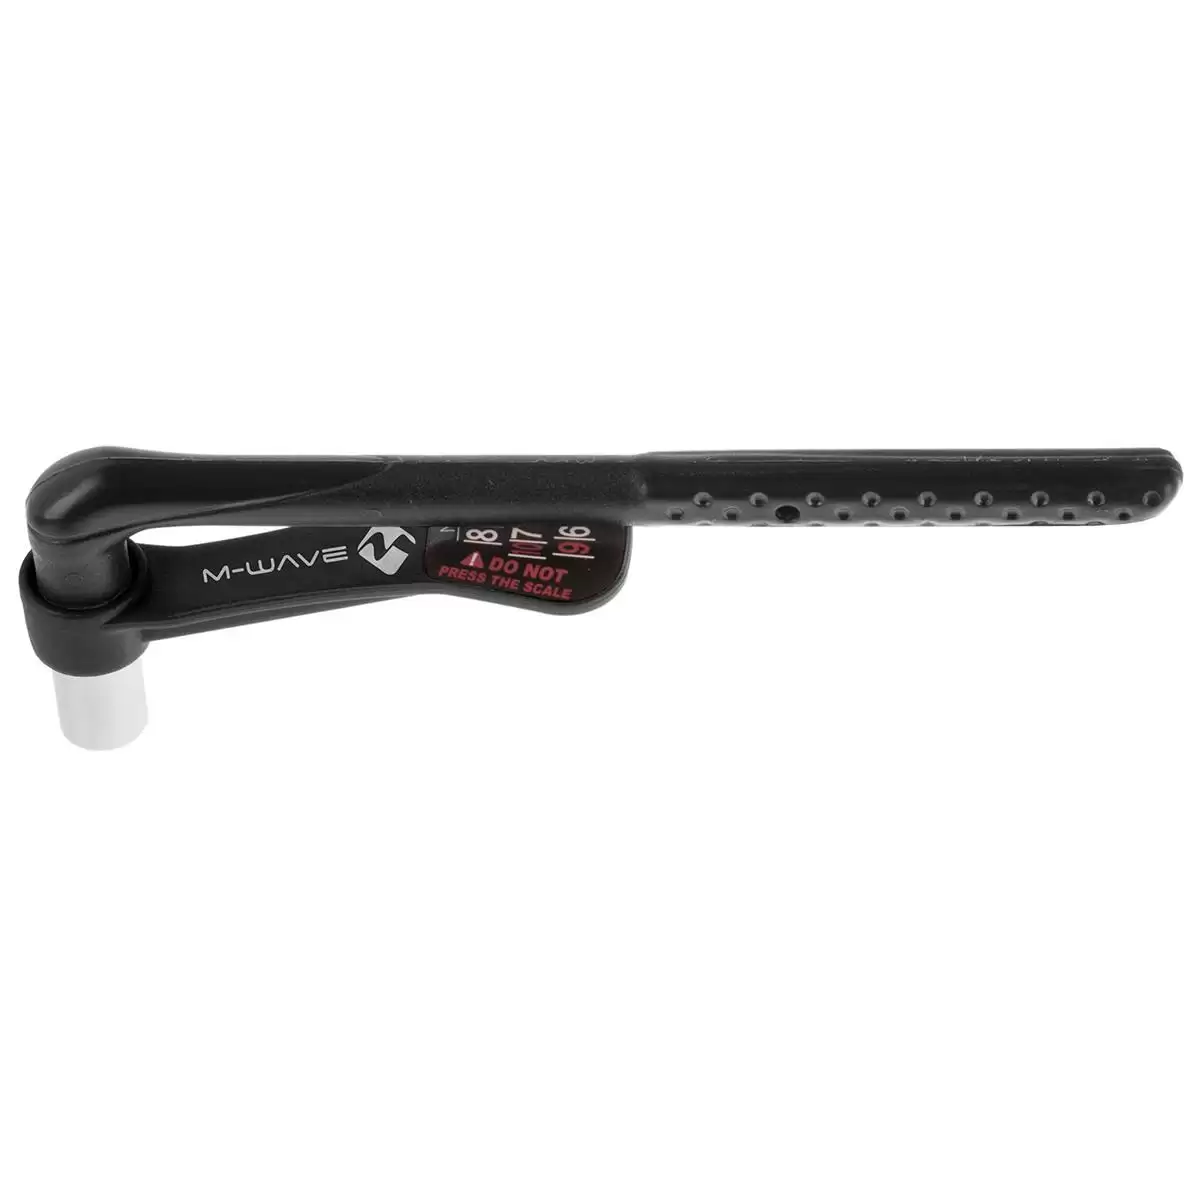 Portable torque wrench 3 - 10nm - image